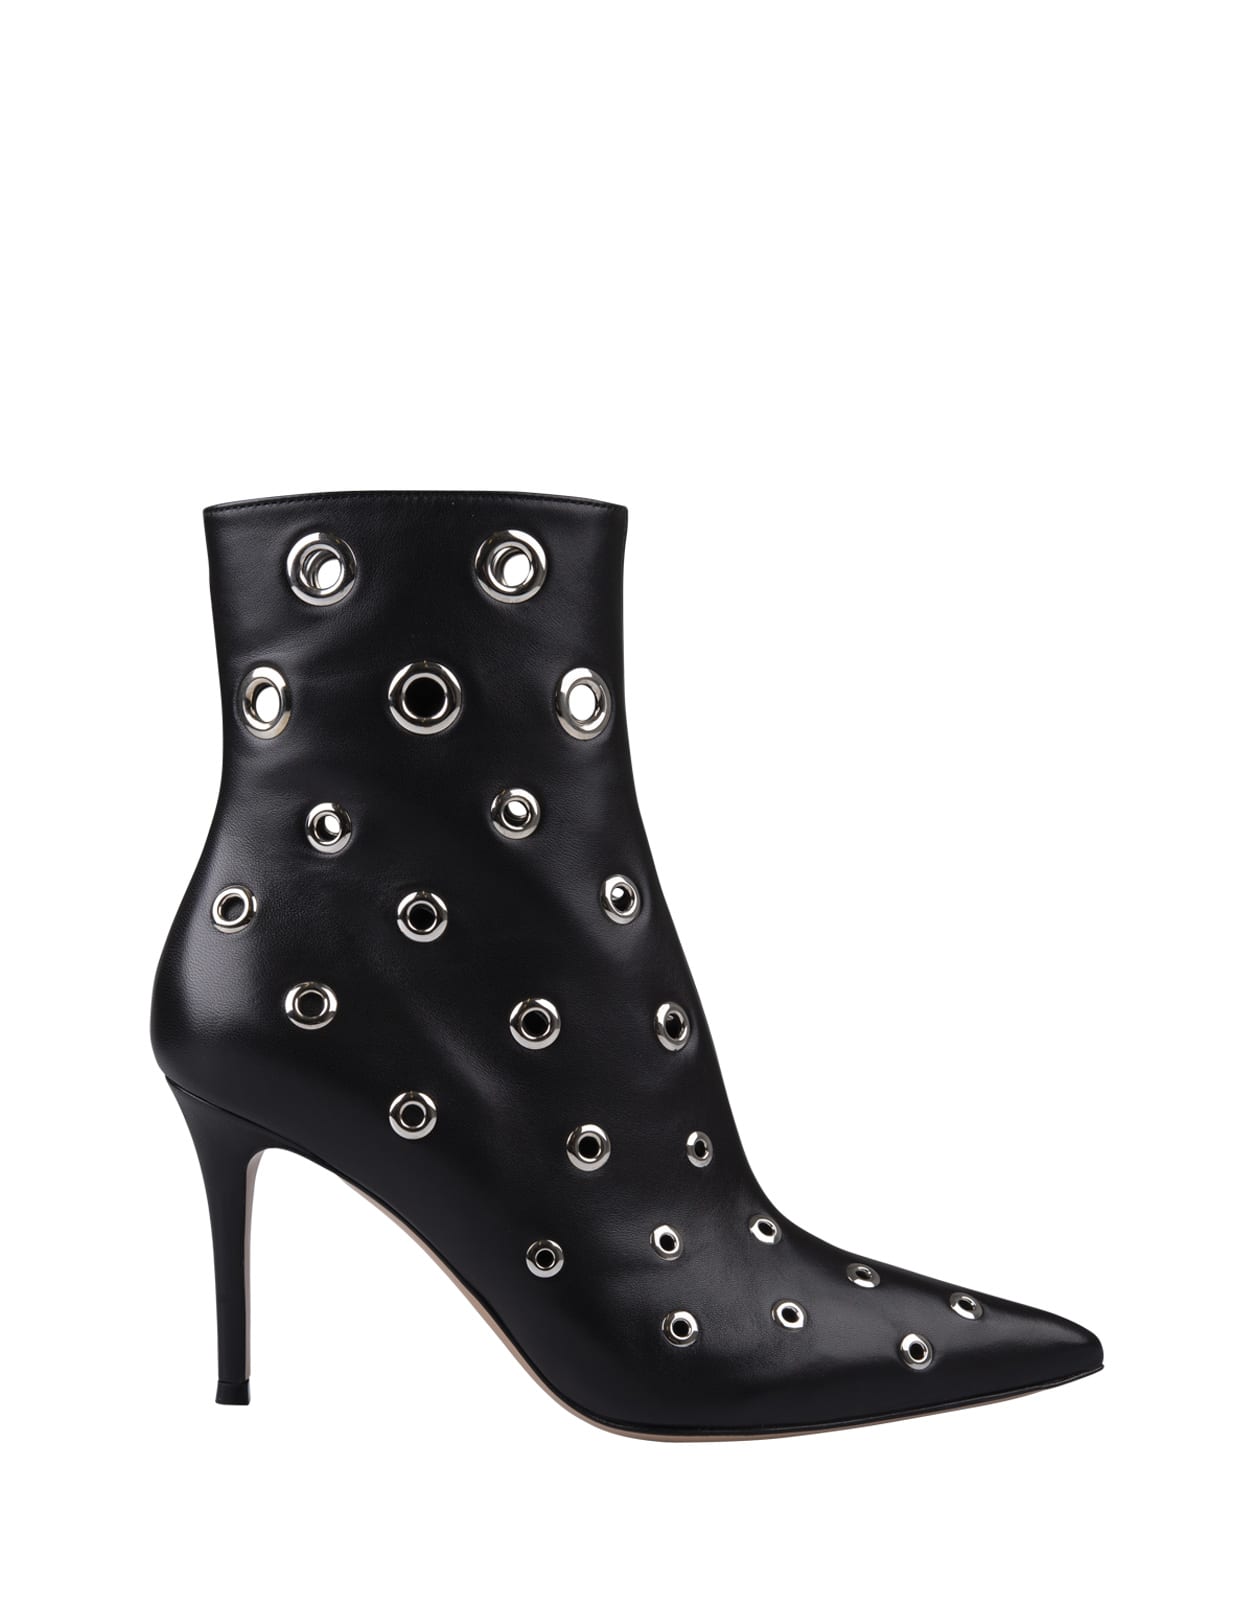 gianvito rossi lydia bootie 85 ankle boots in black